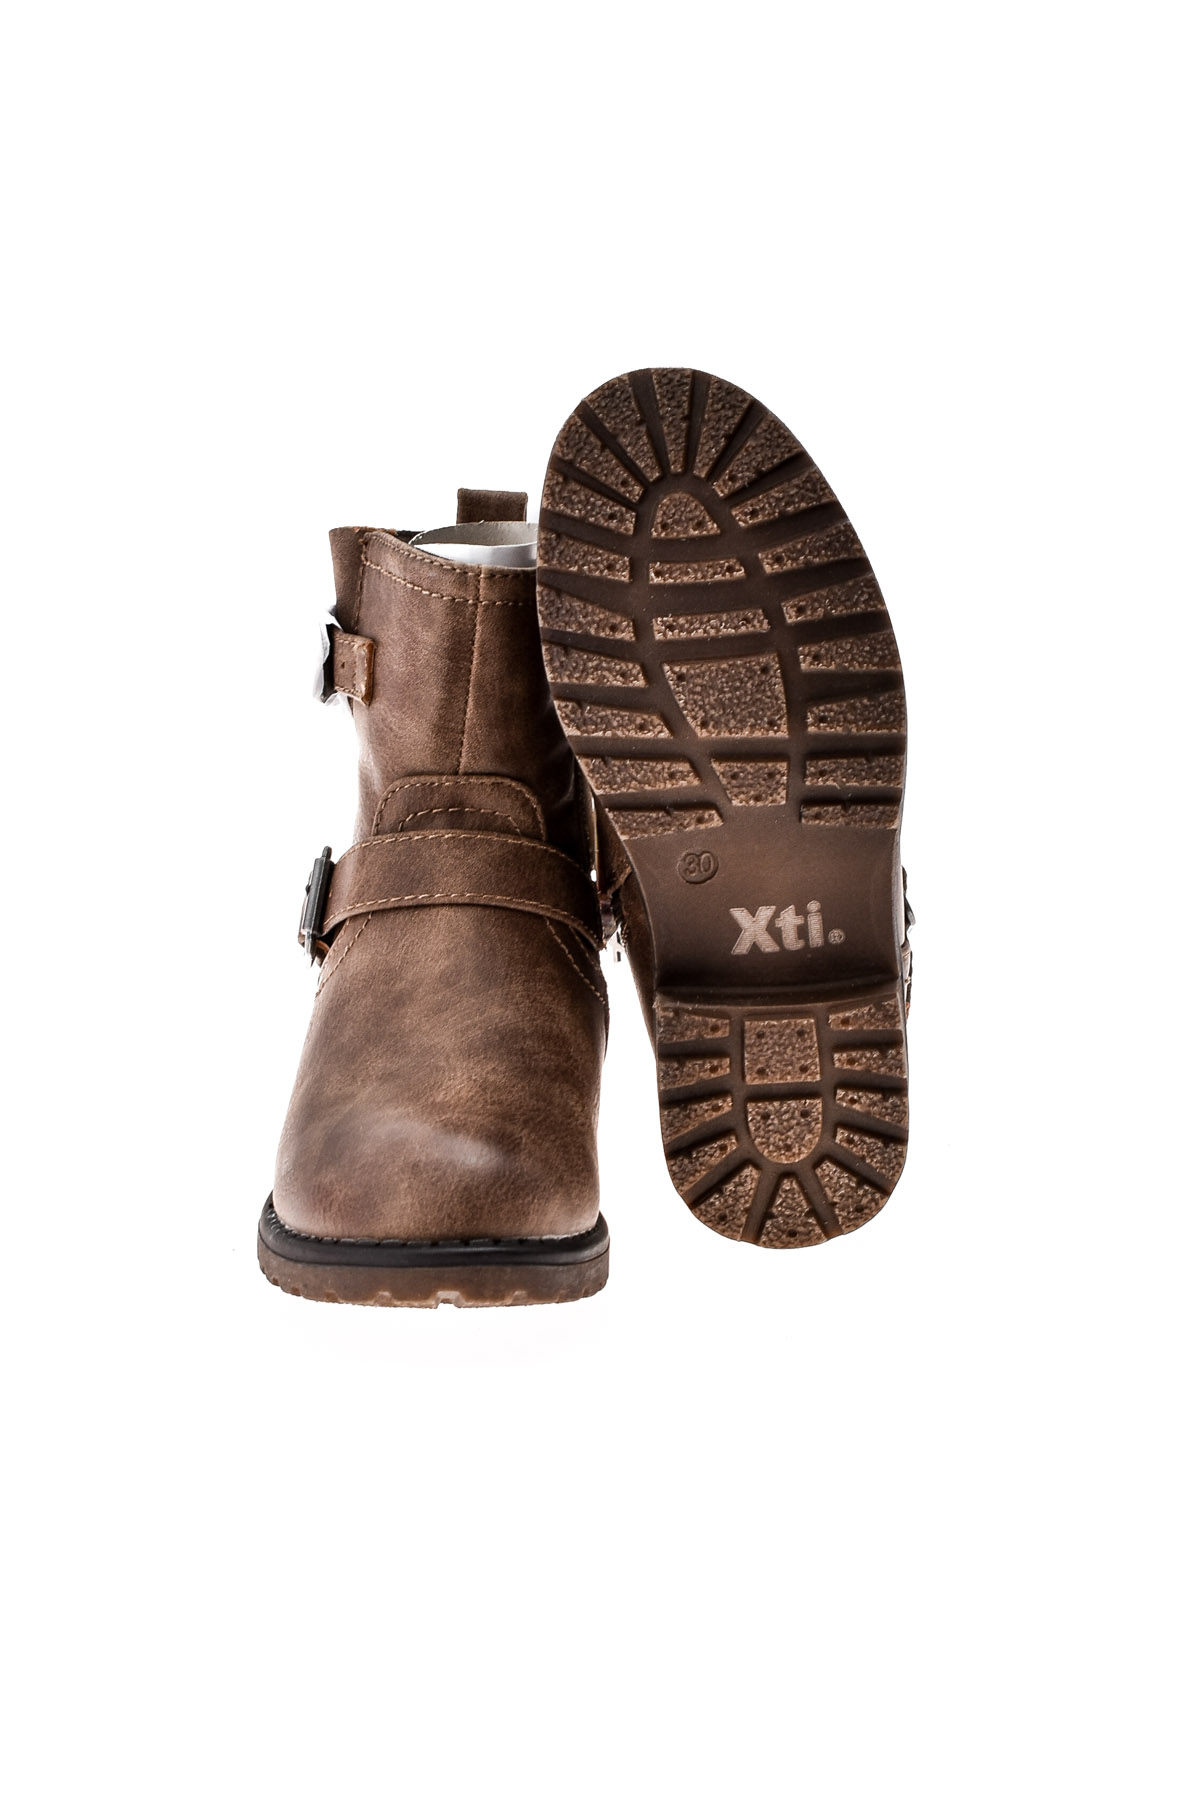 Girl's boots - Xti Kids - 4